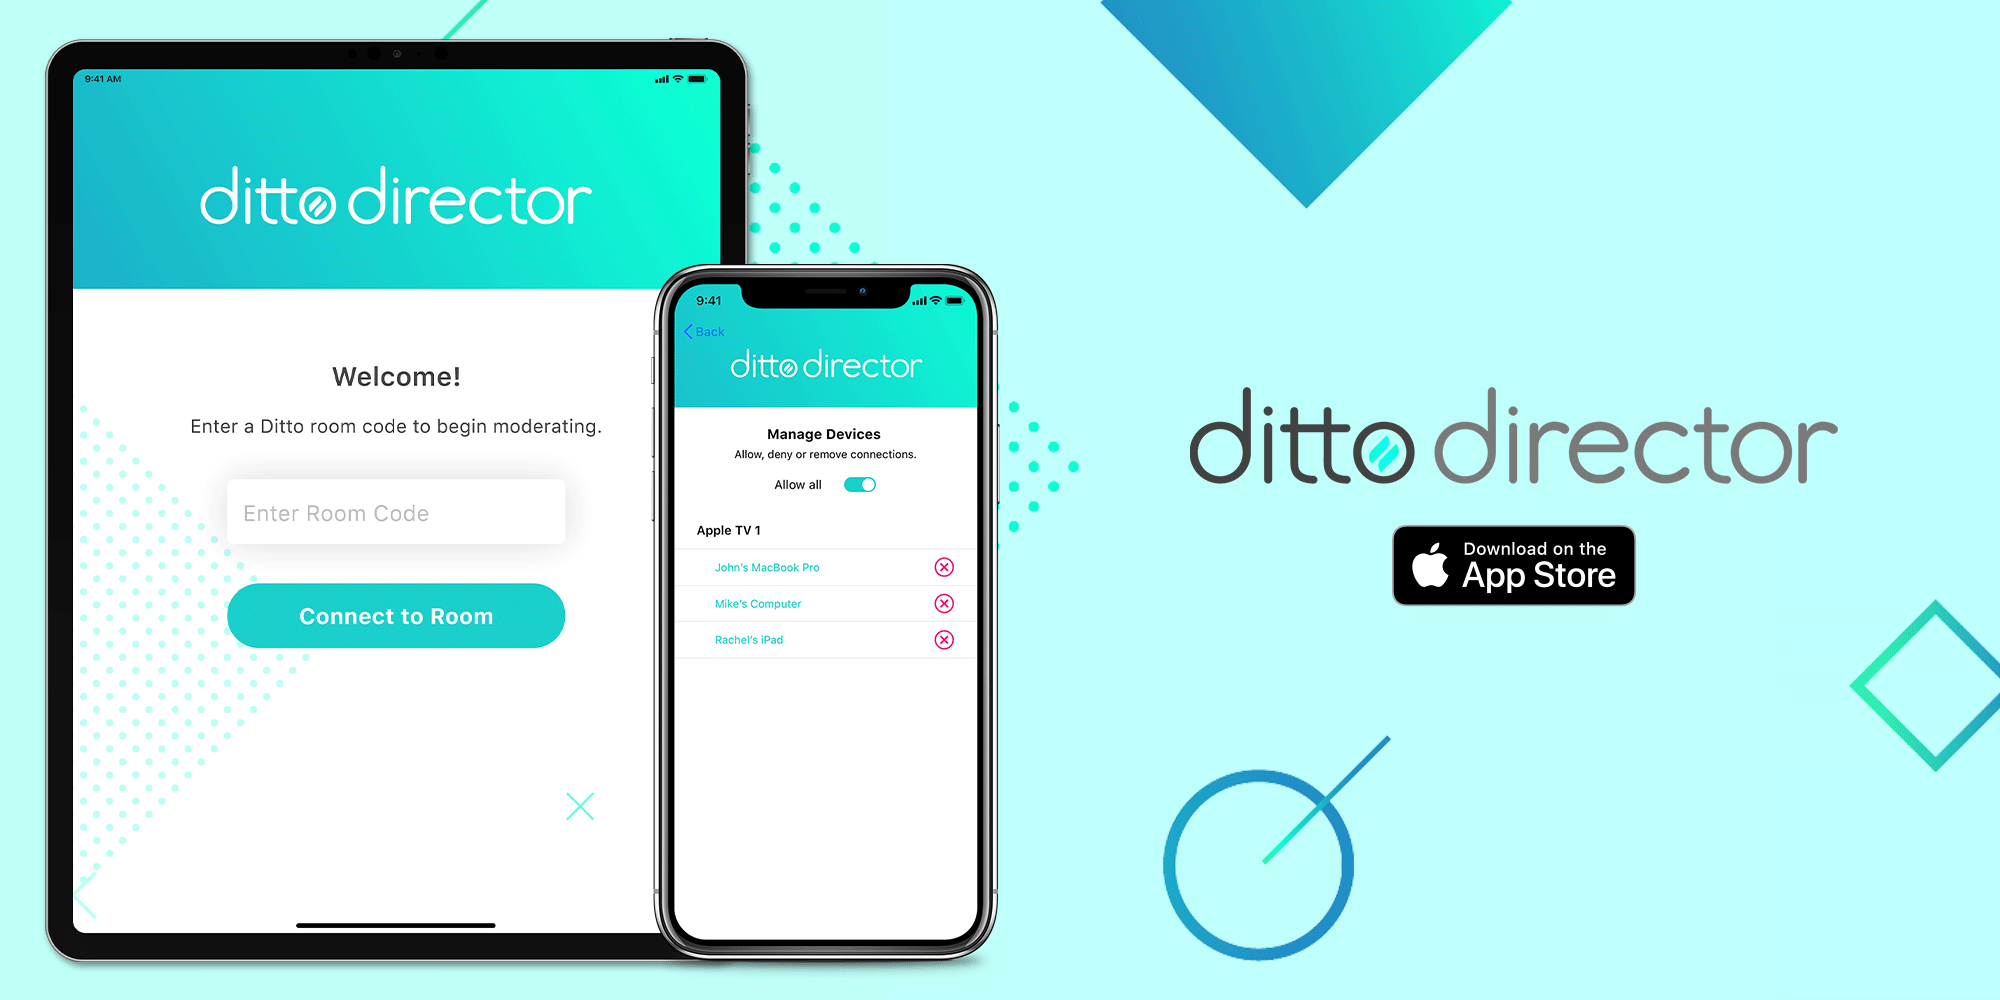 New Ditto Director App Arrives On iPhone and iPad